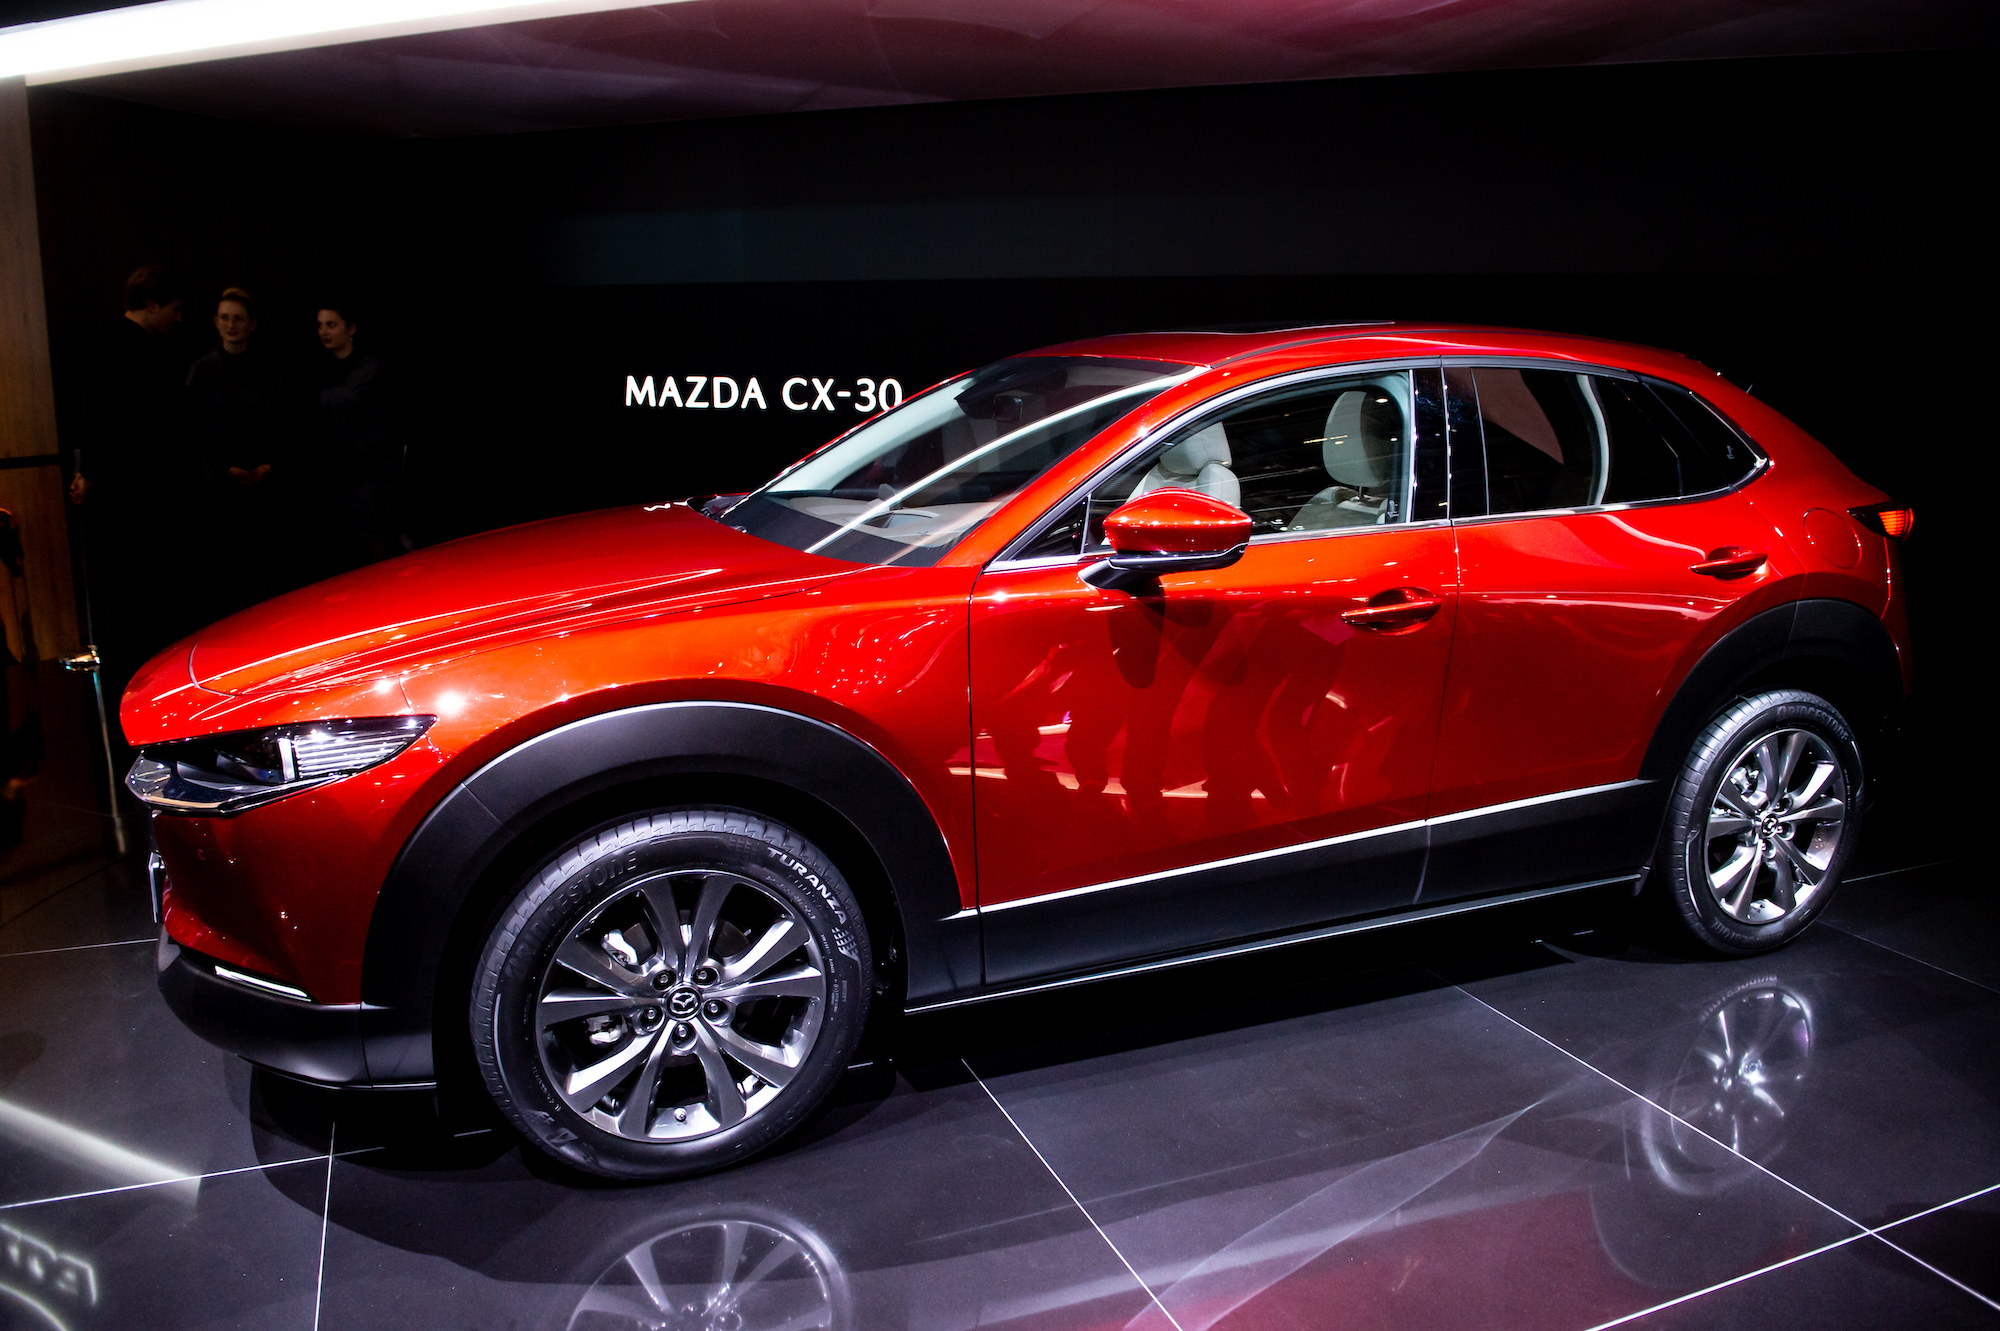 Mazda CX-30 is displayed during the second press day at the 89th Geneva International Motor Show on March 5, 2019, in Geneva, Switzerland.